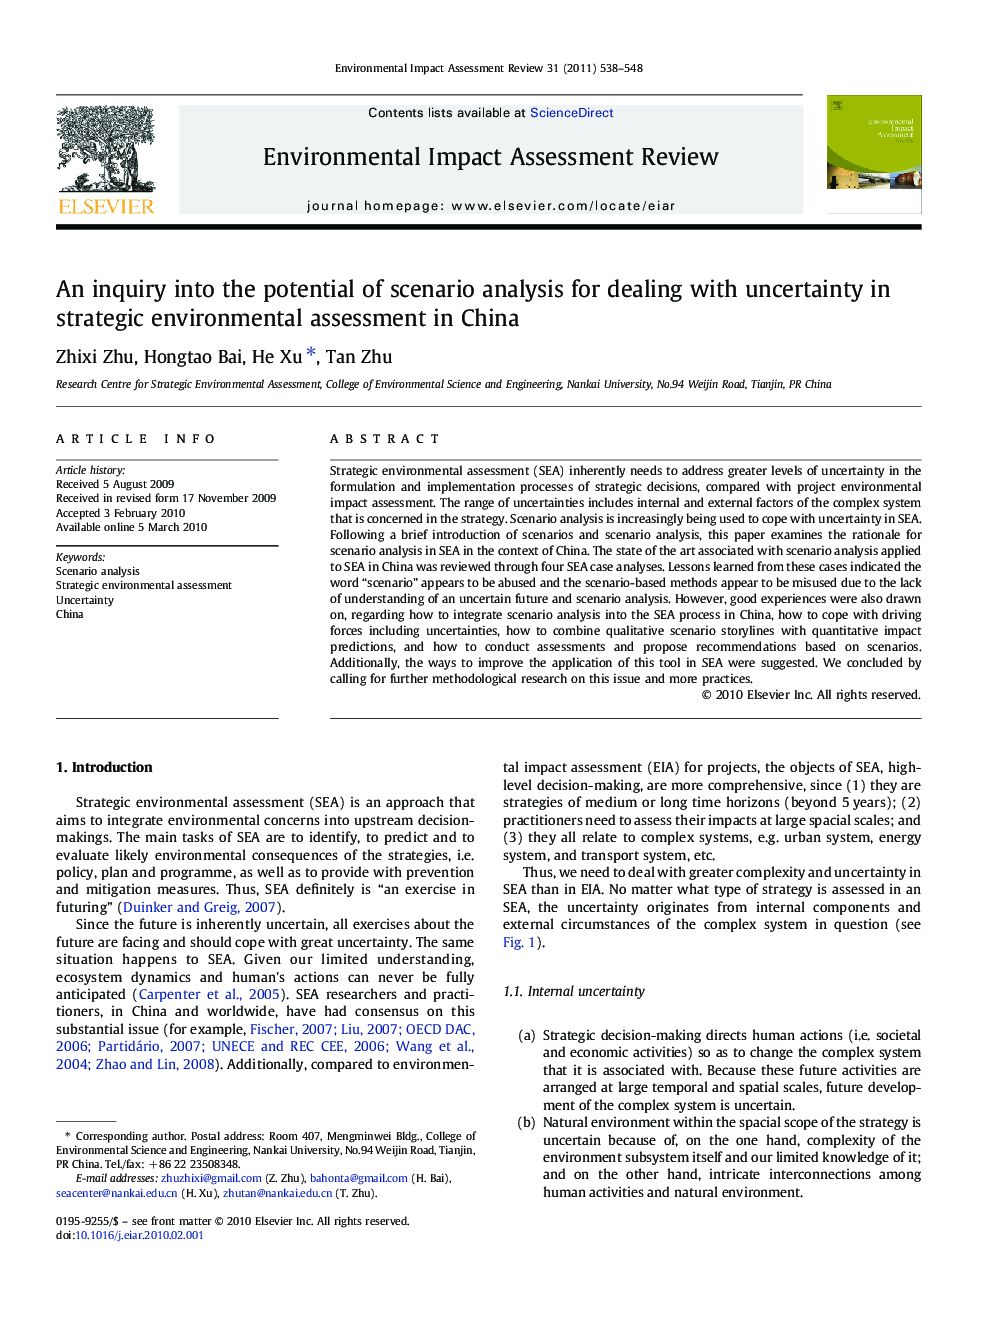 An inquiry into the potential of scenario analysis for dealing with uncertainty in strategic environmental assessment in China